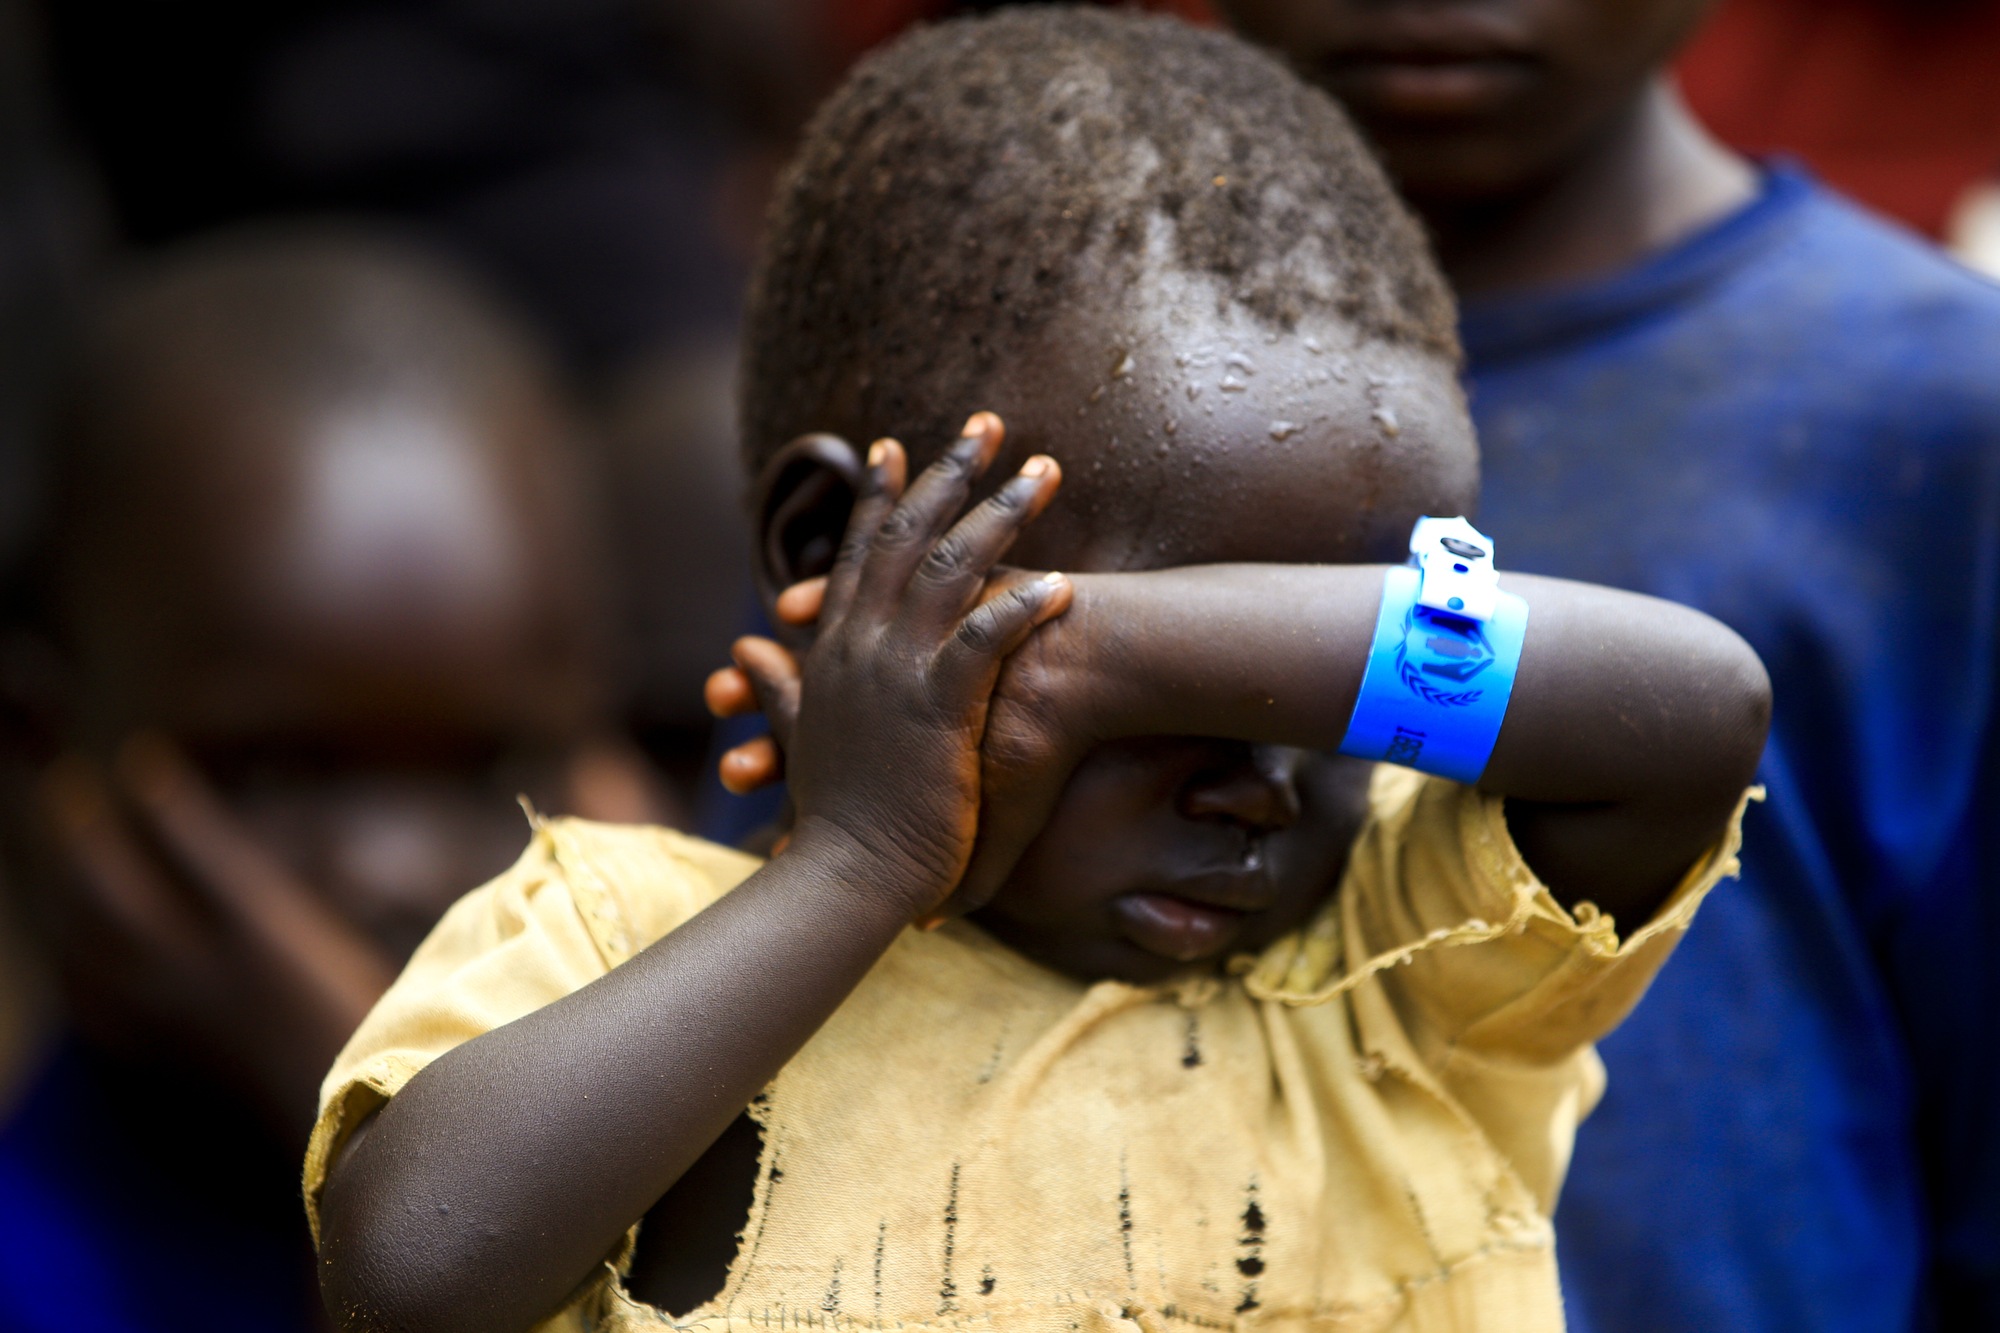 A child from Pajok, South Sudan wearing an arm band signifying his refugee status after his family fled to Uganda to flee the violence.